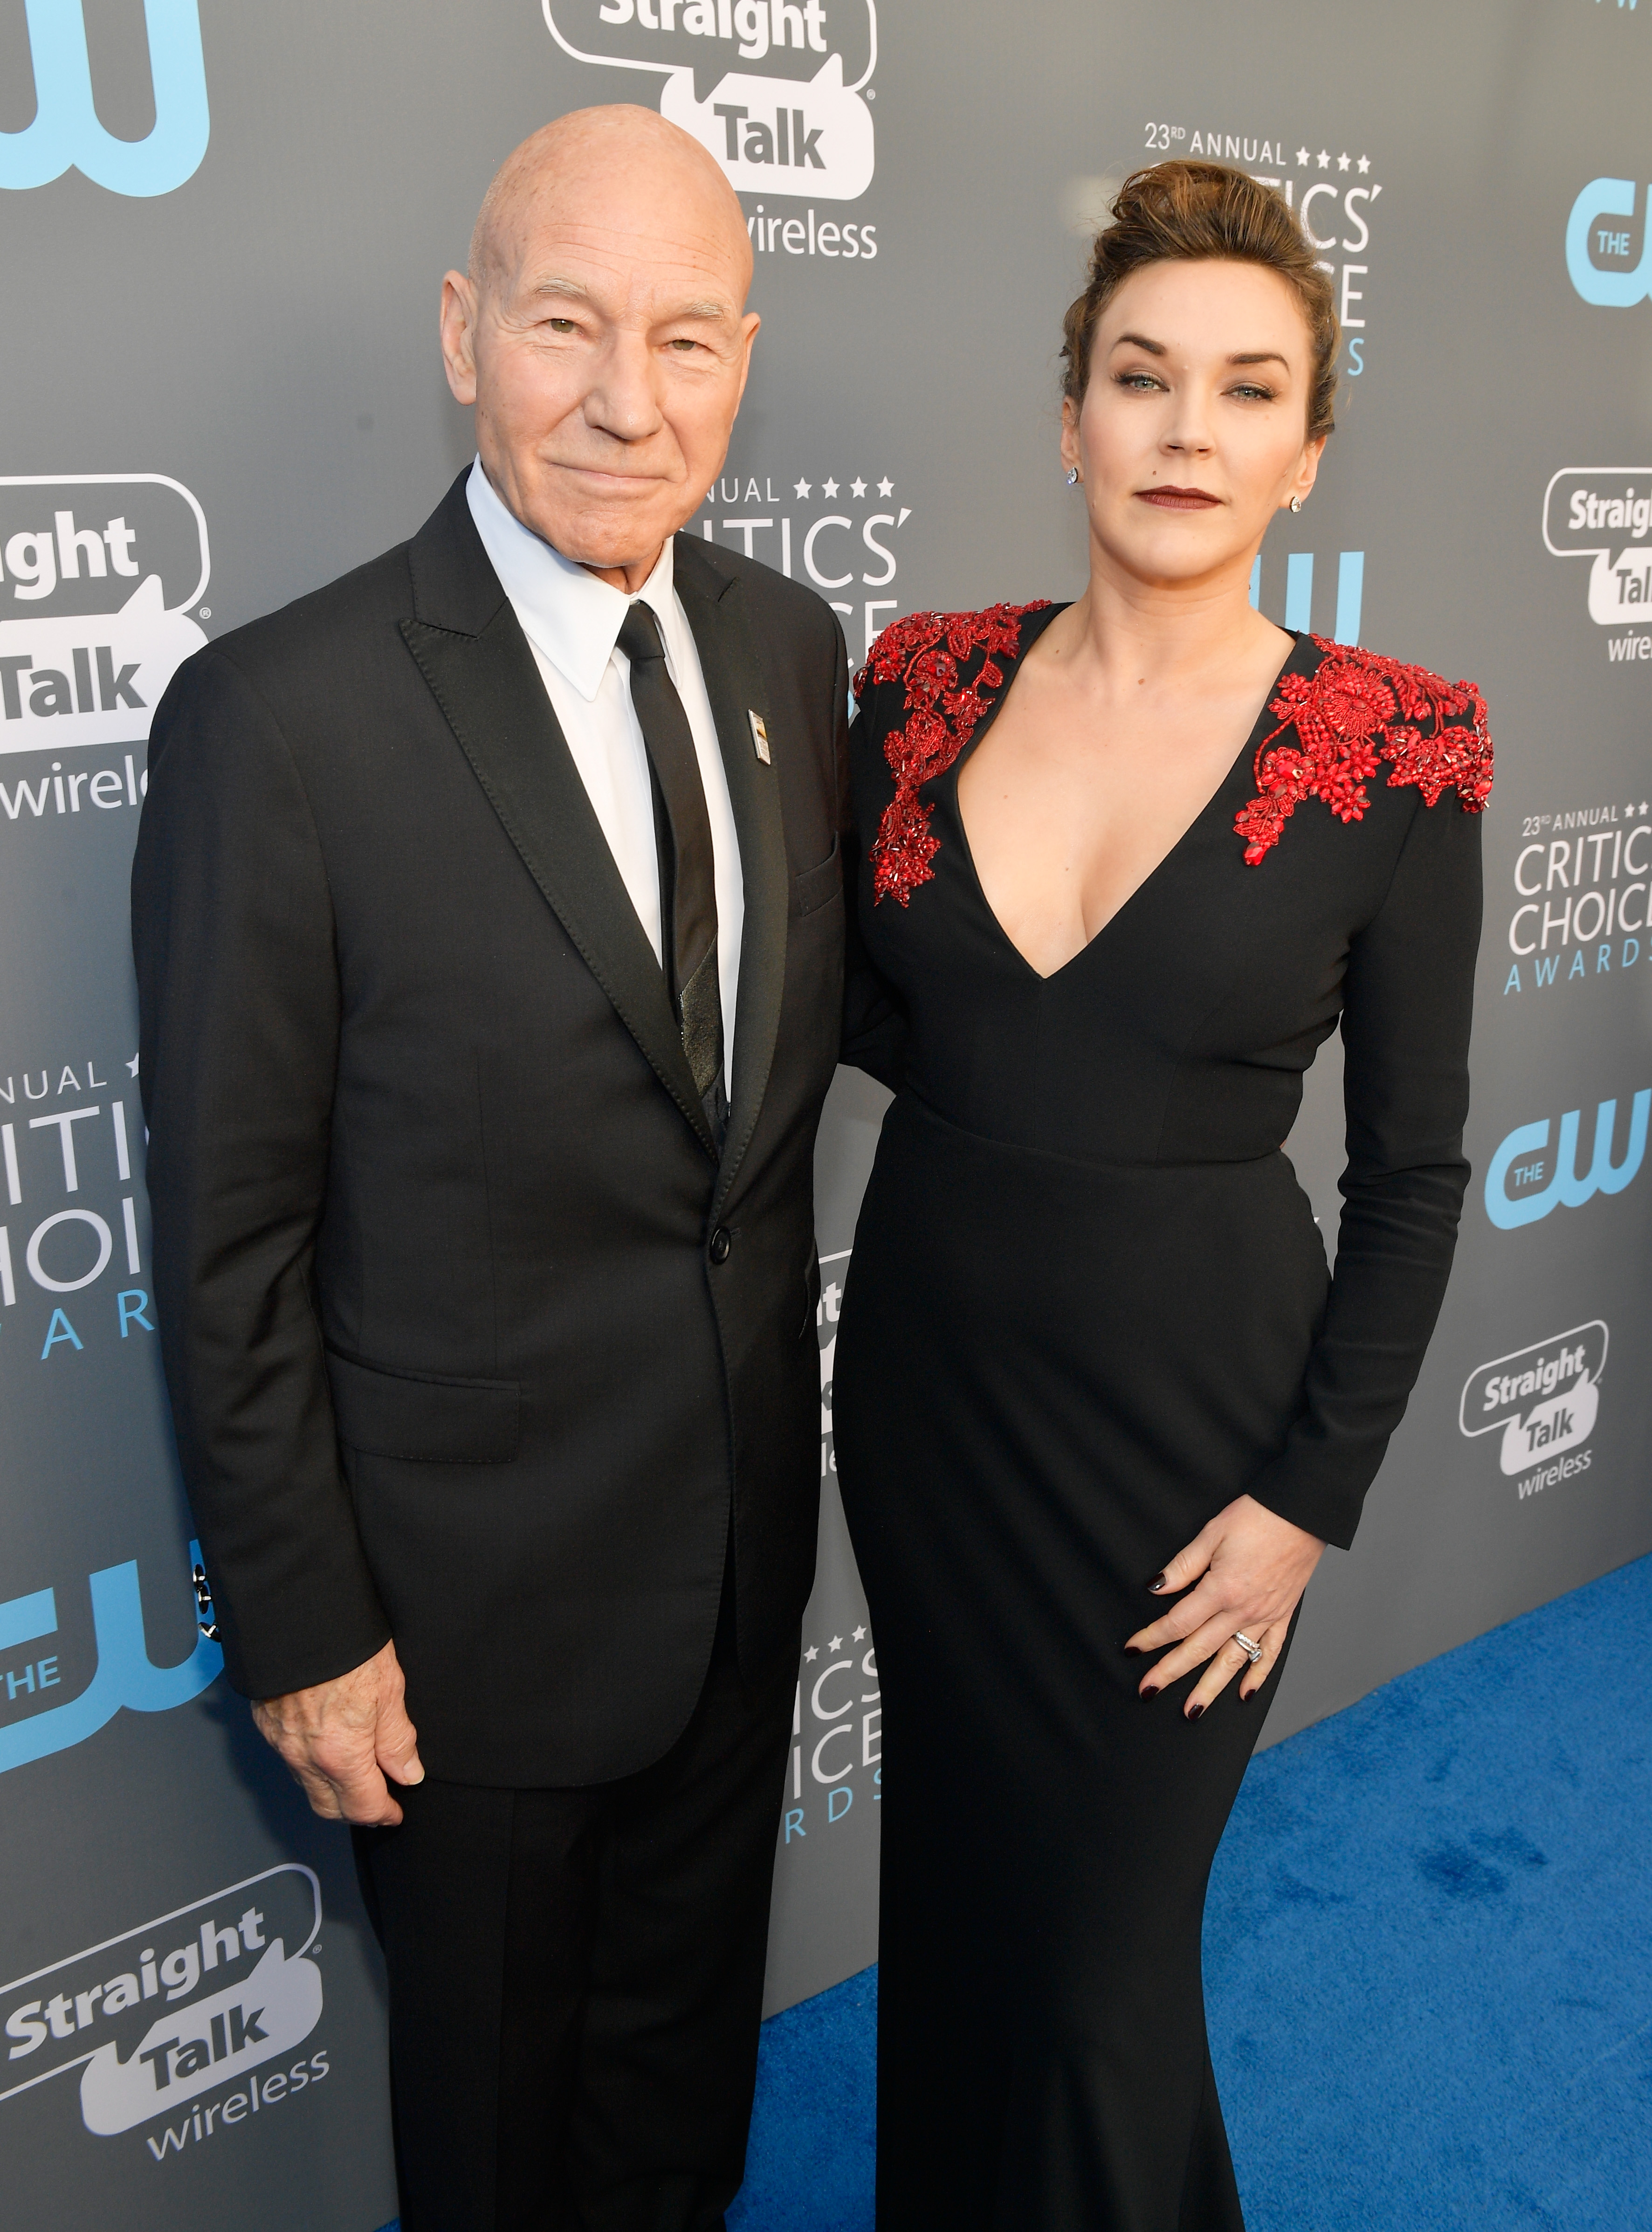 Patrick Stewart and singer Sunny Ozell at the 23rd Annual Critics' Choice Awards in Santa Monica, California on January 11, 2018 | Source: Getty Images